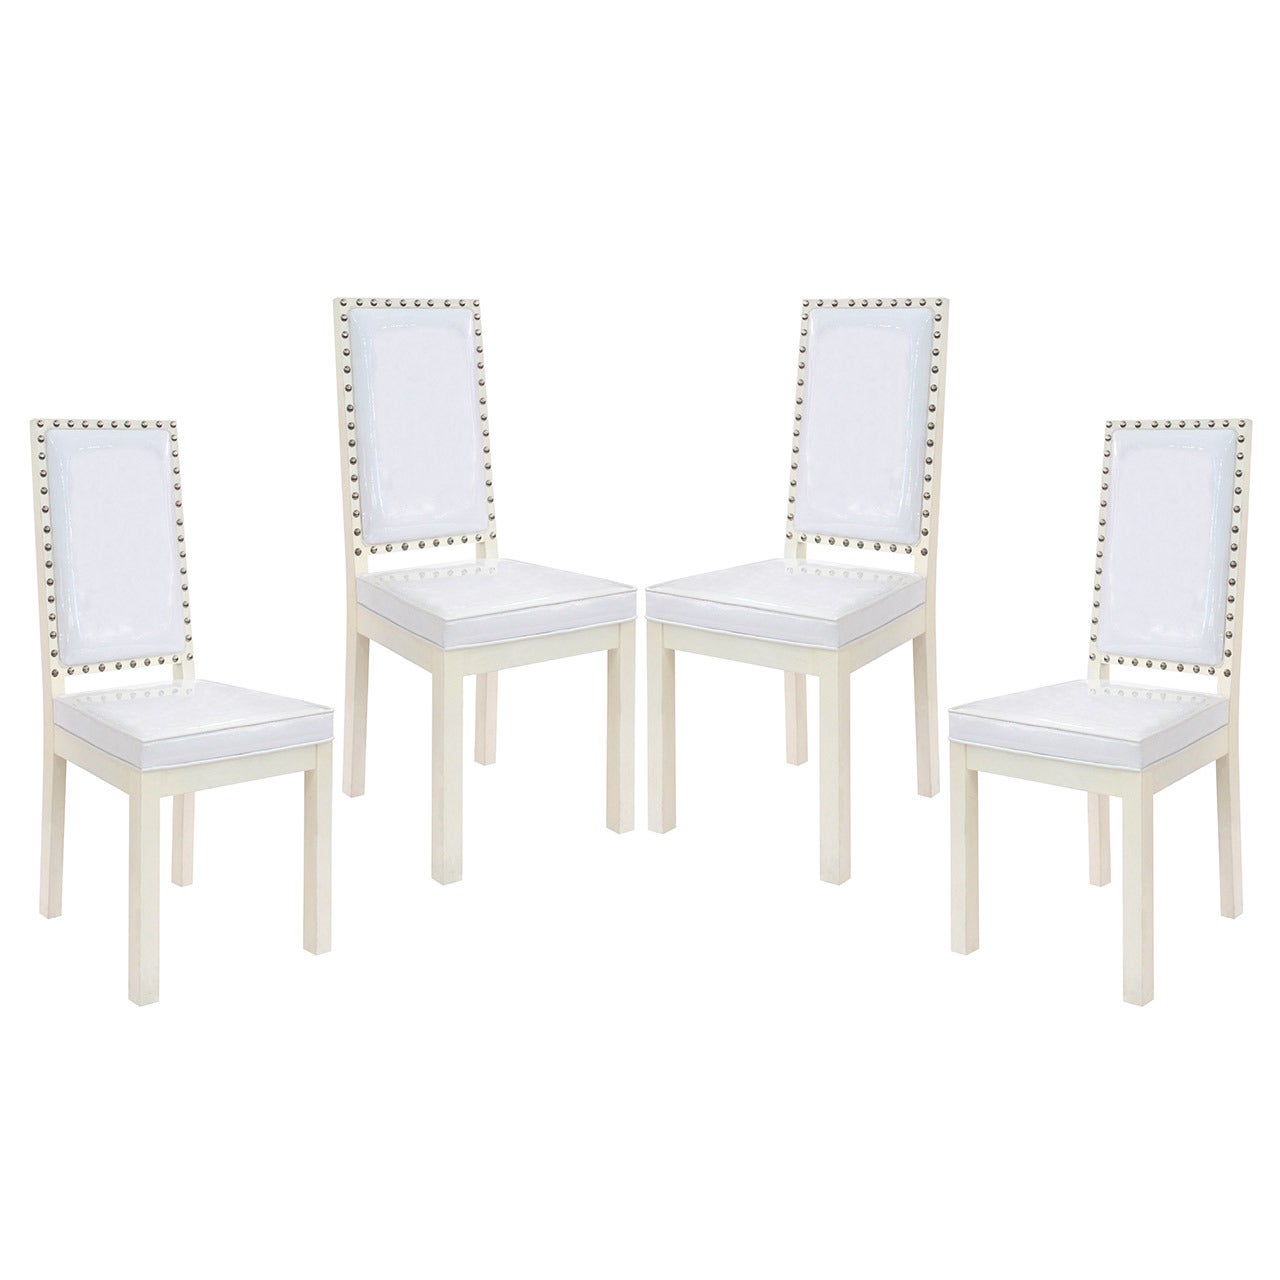 Four Dining or Game Chairs with Studs in the Manner of Tommi Parzinger 1950's